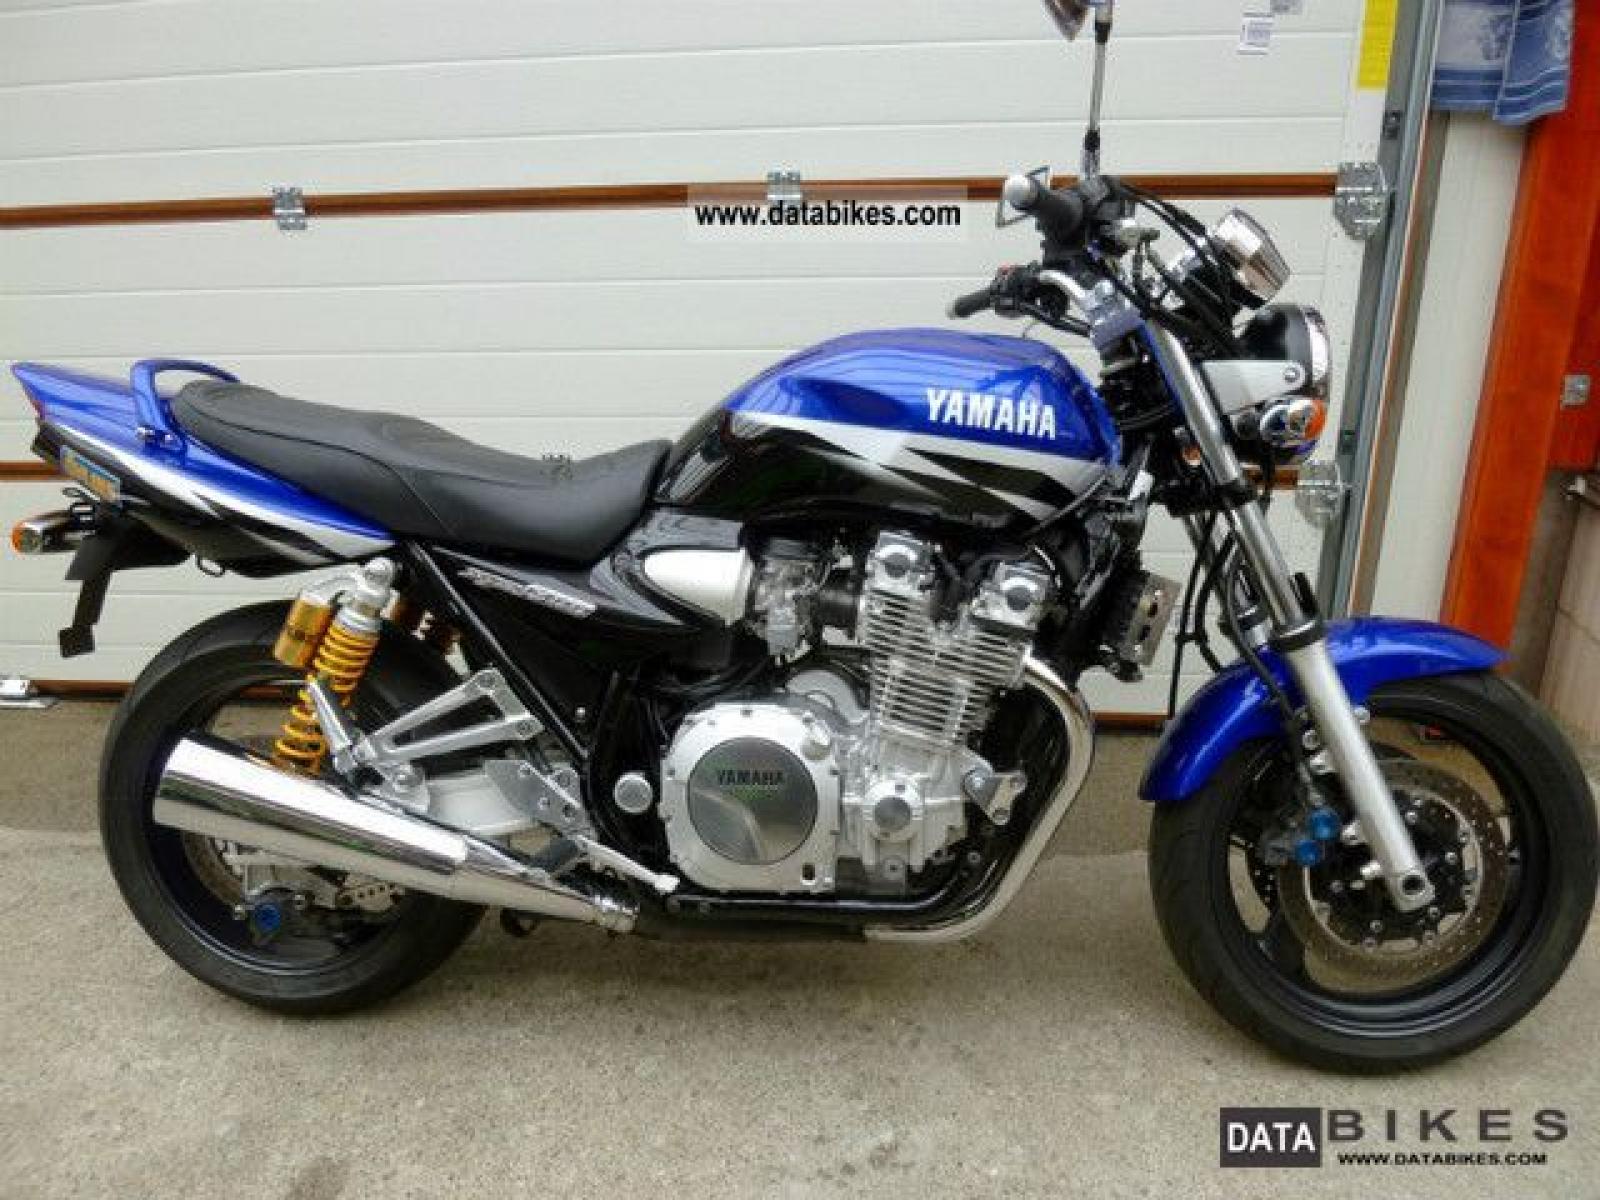 Yamaha XJR 1300 (2002-04) - MotorcycleSpecifications.com